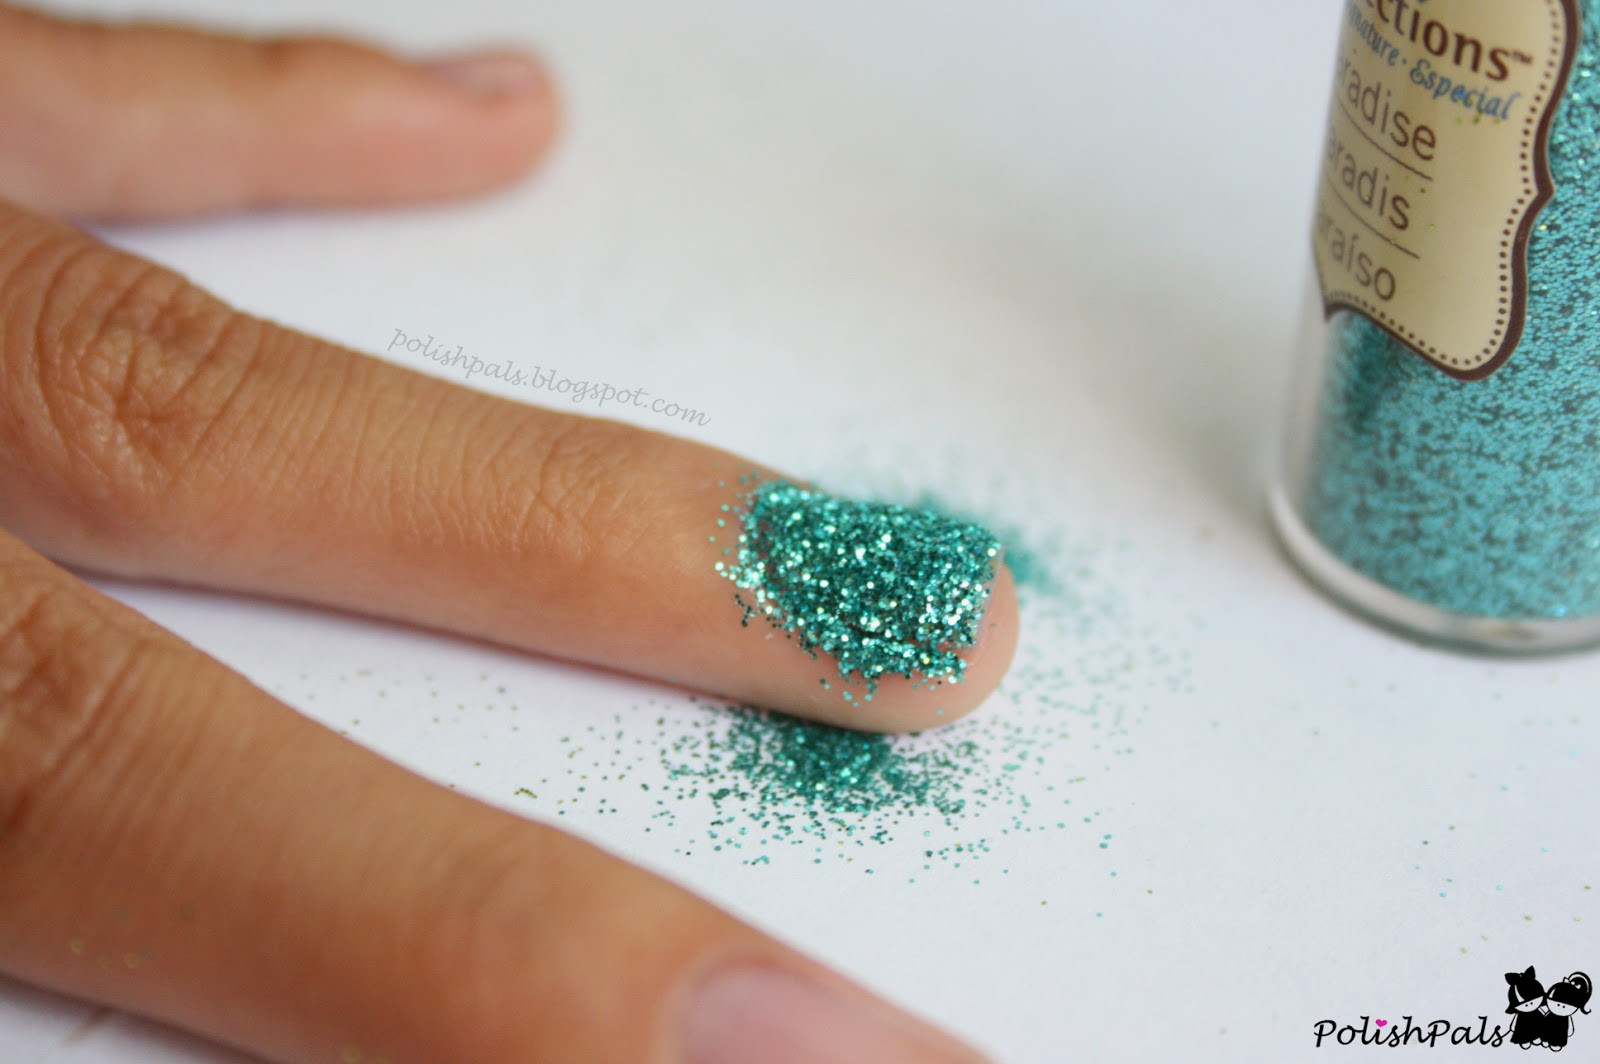 How To Apply Loose Glitter To Nails
 Polish Pals Ombre Loose Glitter Nails Tutorial